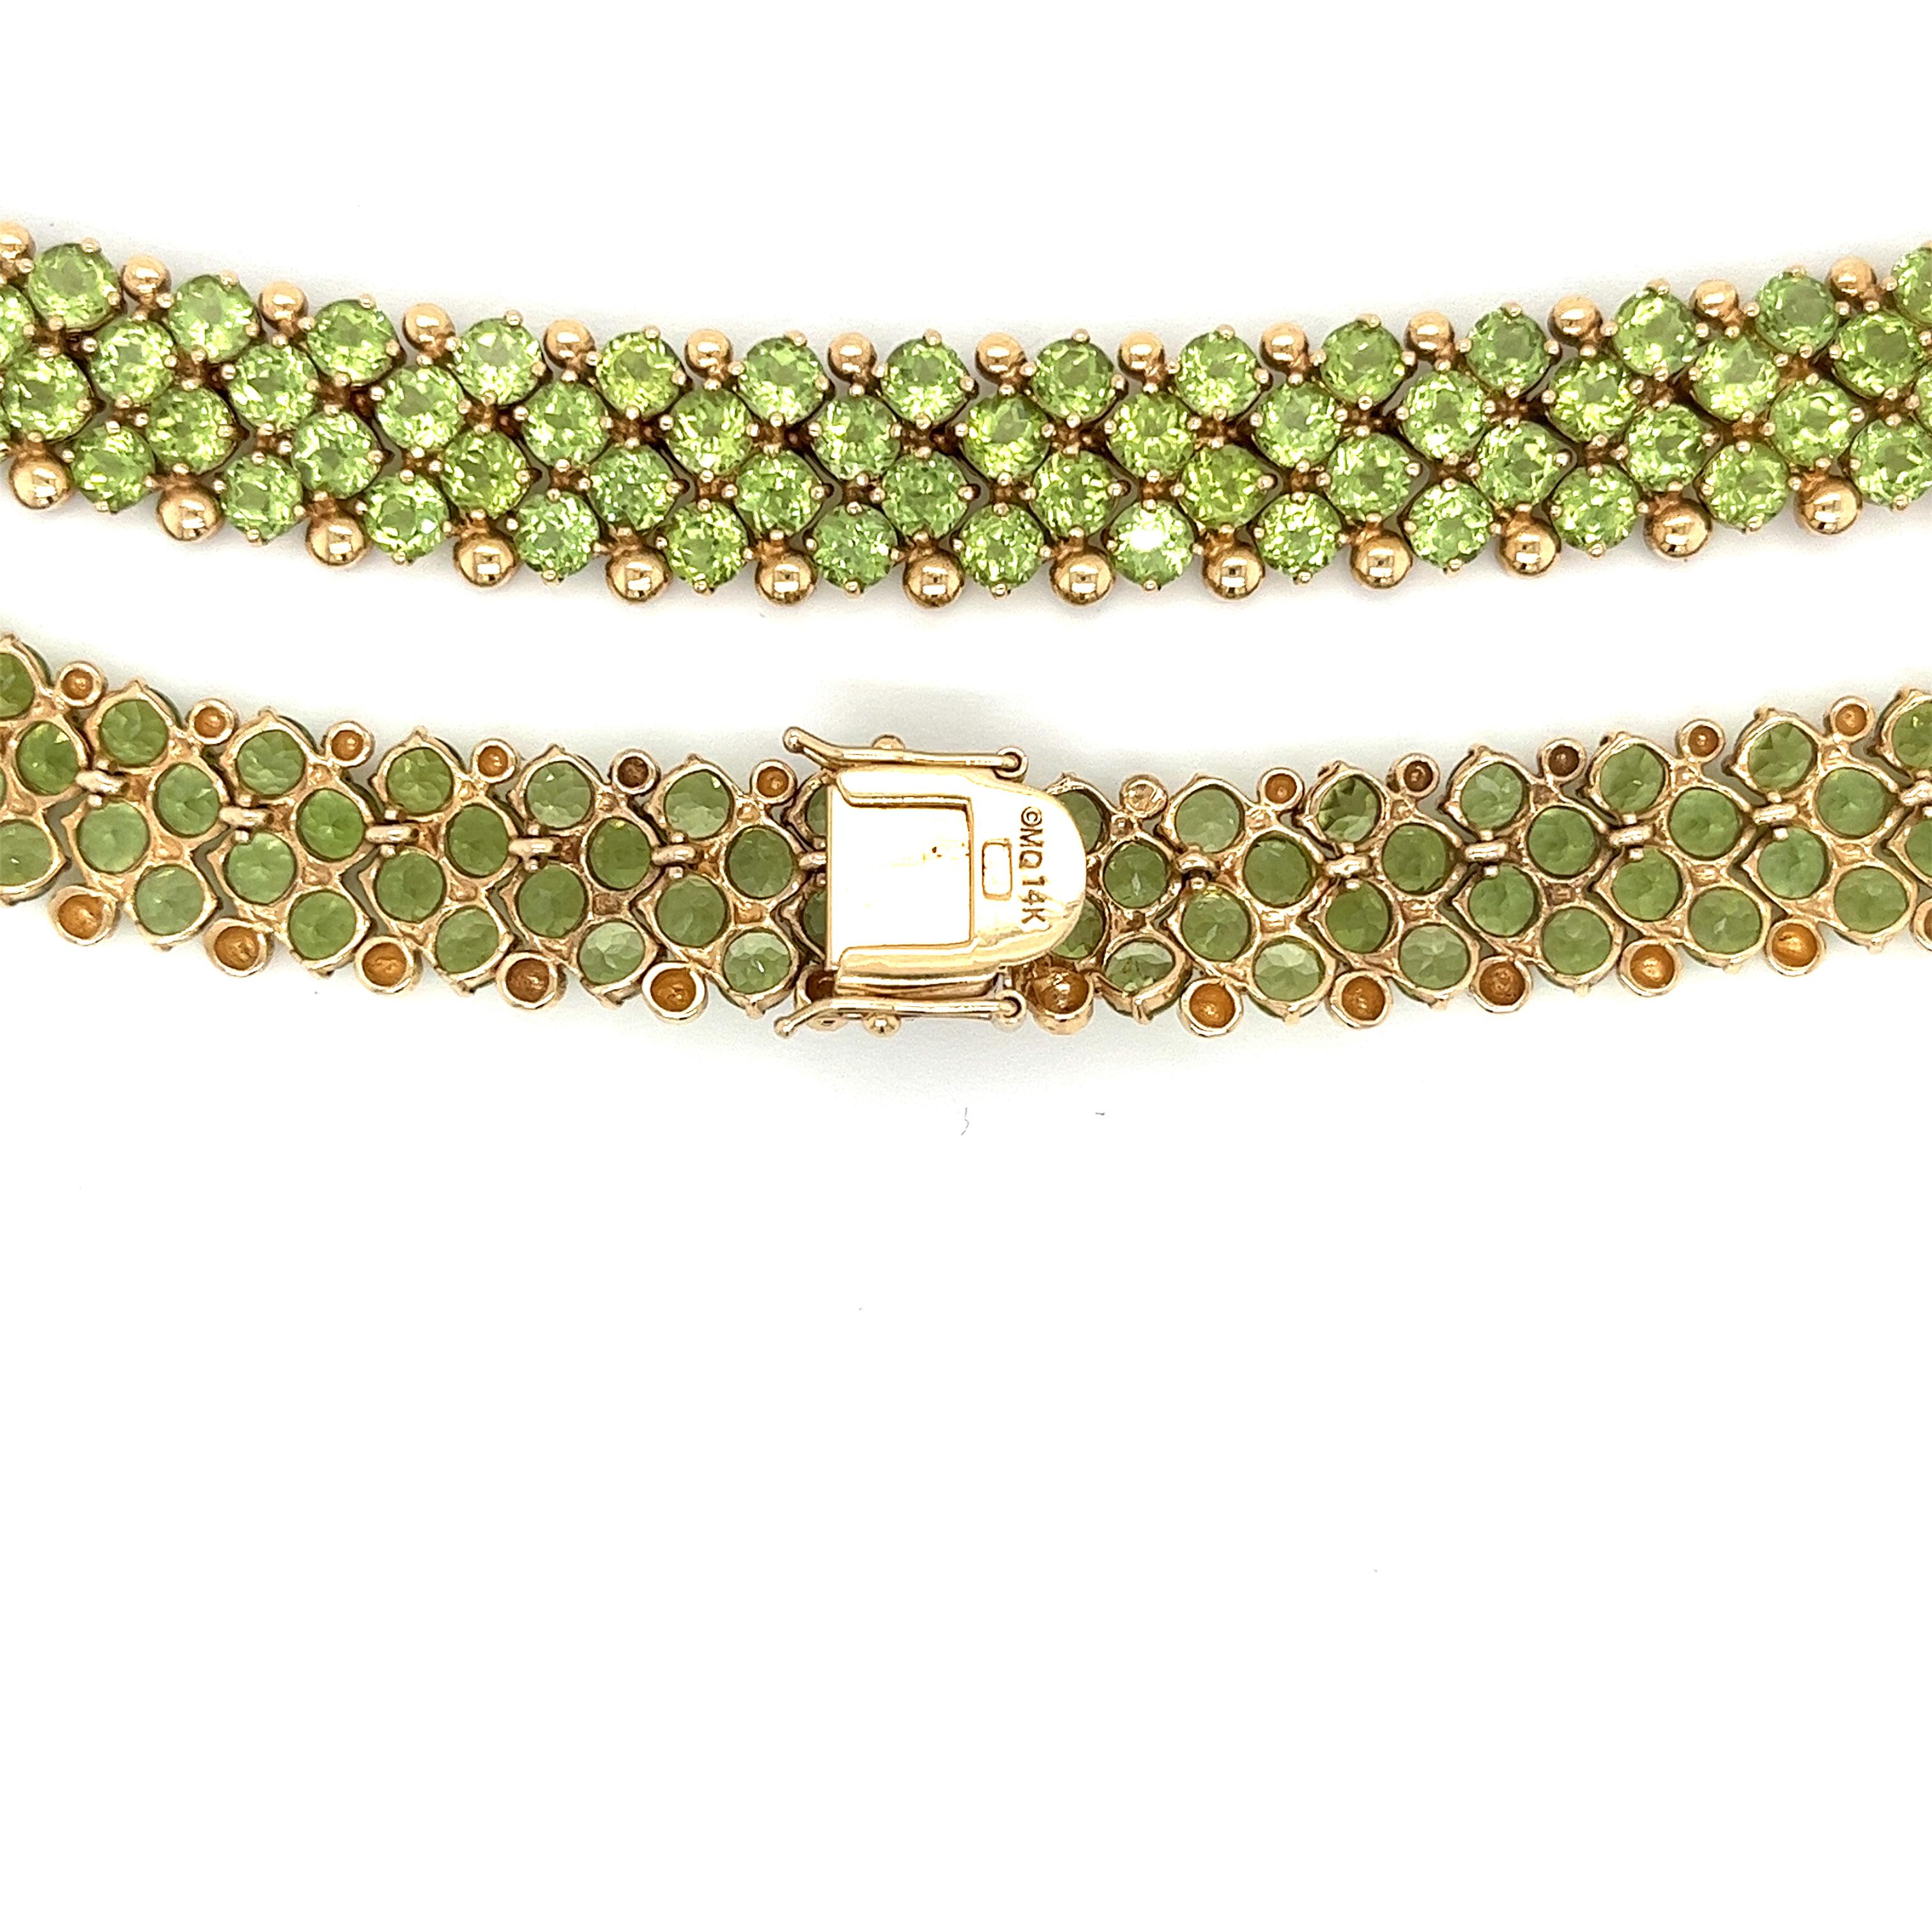 Uncut 45 Carat Mixed Cut Green Peridot Cluster Choker Necklace in 14K Yellow Gold For Sale